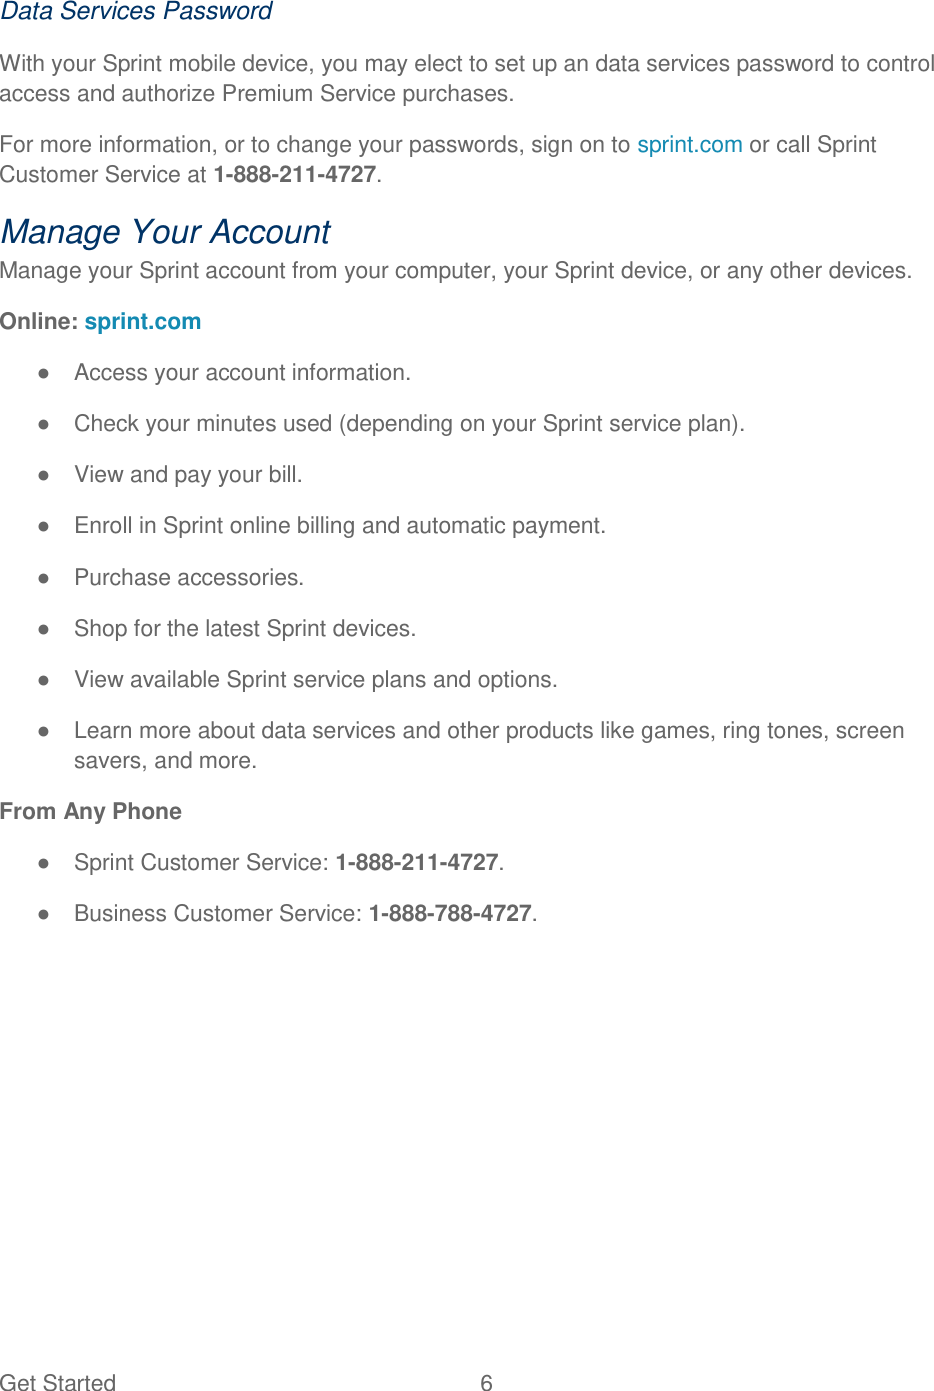 Get Started  6   Data Services Password With your Sprint mobile device, you may elect to set up an data services password to control access and authorize Premium Service purchases. For more information, or to change your passwords, sign on to sprint.com or call Sprint Customer Service at 1-888-211-4727. Manage Your Account Manage your Sprint account from your computer, your Sprint device, or any other devices. Online: sprint.com ●  Access your account information. ●  Check your minutes used (depending on your Sprint service plan). ●  View and pay your bill. ●  Enroll in Sprint online billing and automatic payment. ●  Purchase accessories. ●  Shop for the latest Sprint devices. ●  View available Sprint service plans and options. ●  Learn more about data services and other products like games, ring tones, screen savers, and more. From Any Phone ●  Sprint Customer Service: 1-888-211-4727. ●  Business Customer Service: 1-888-788-4727. 